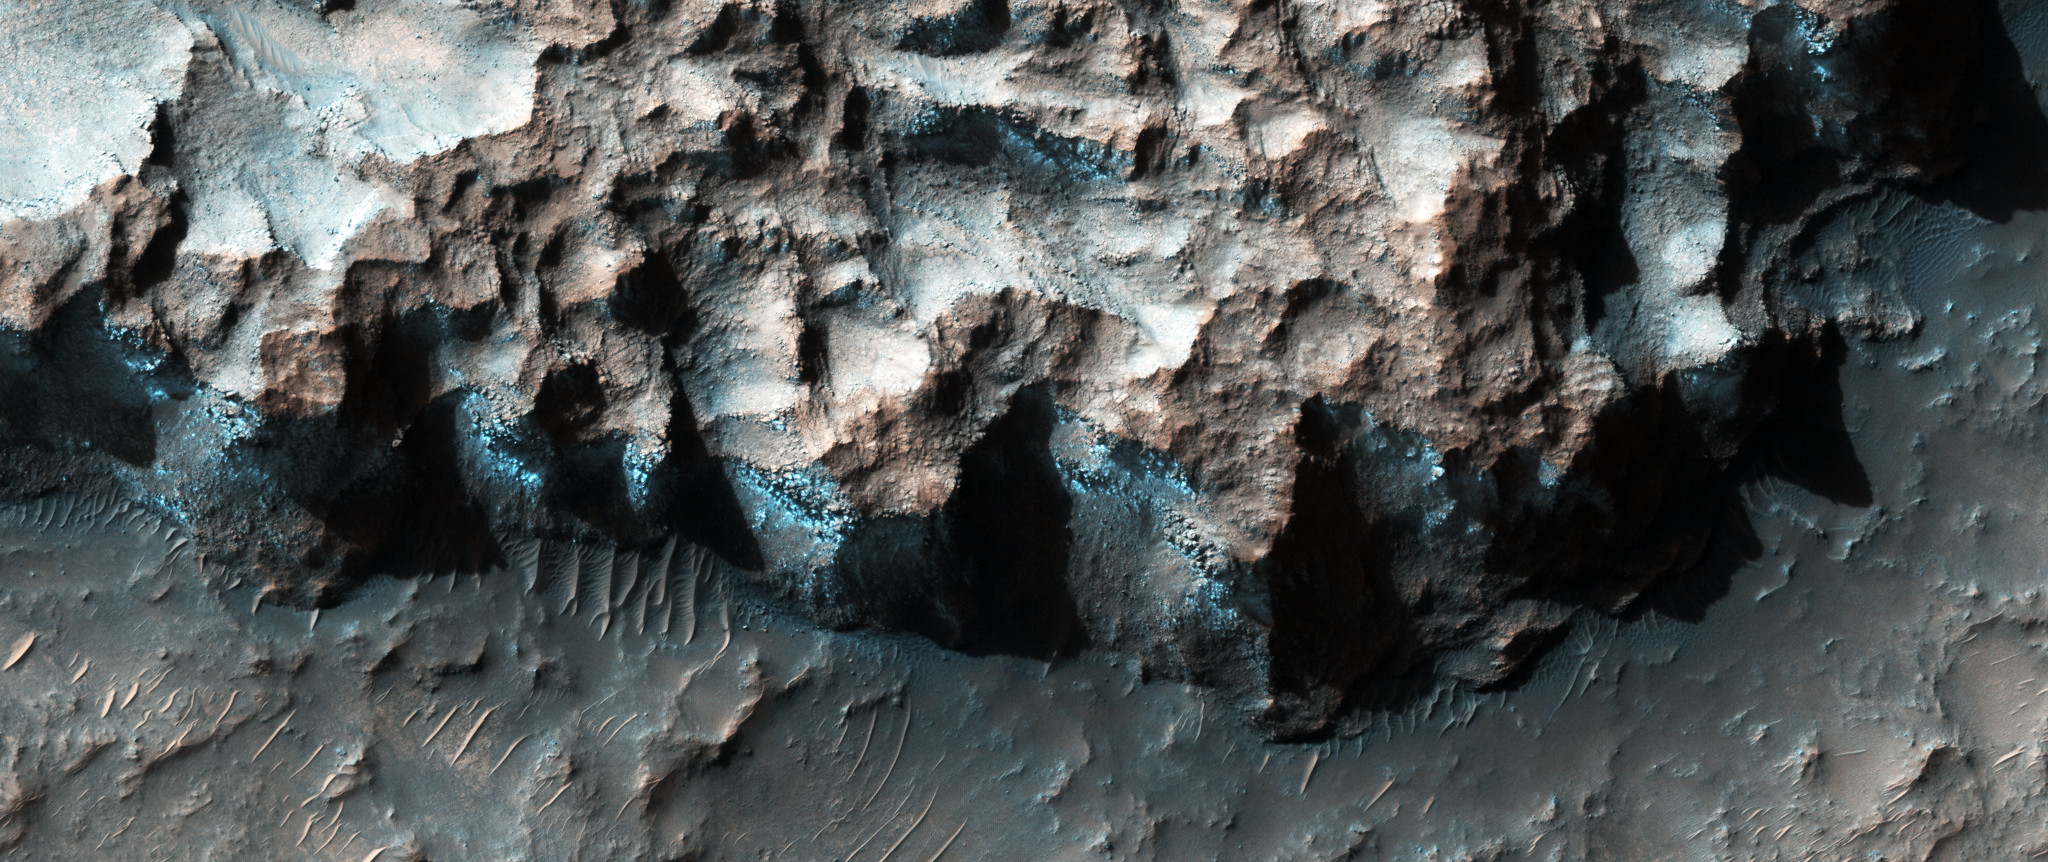 Bluish rock in the Hellas region of Mars that indicates the presence of phyllosilicates